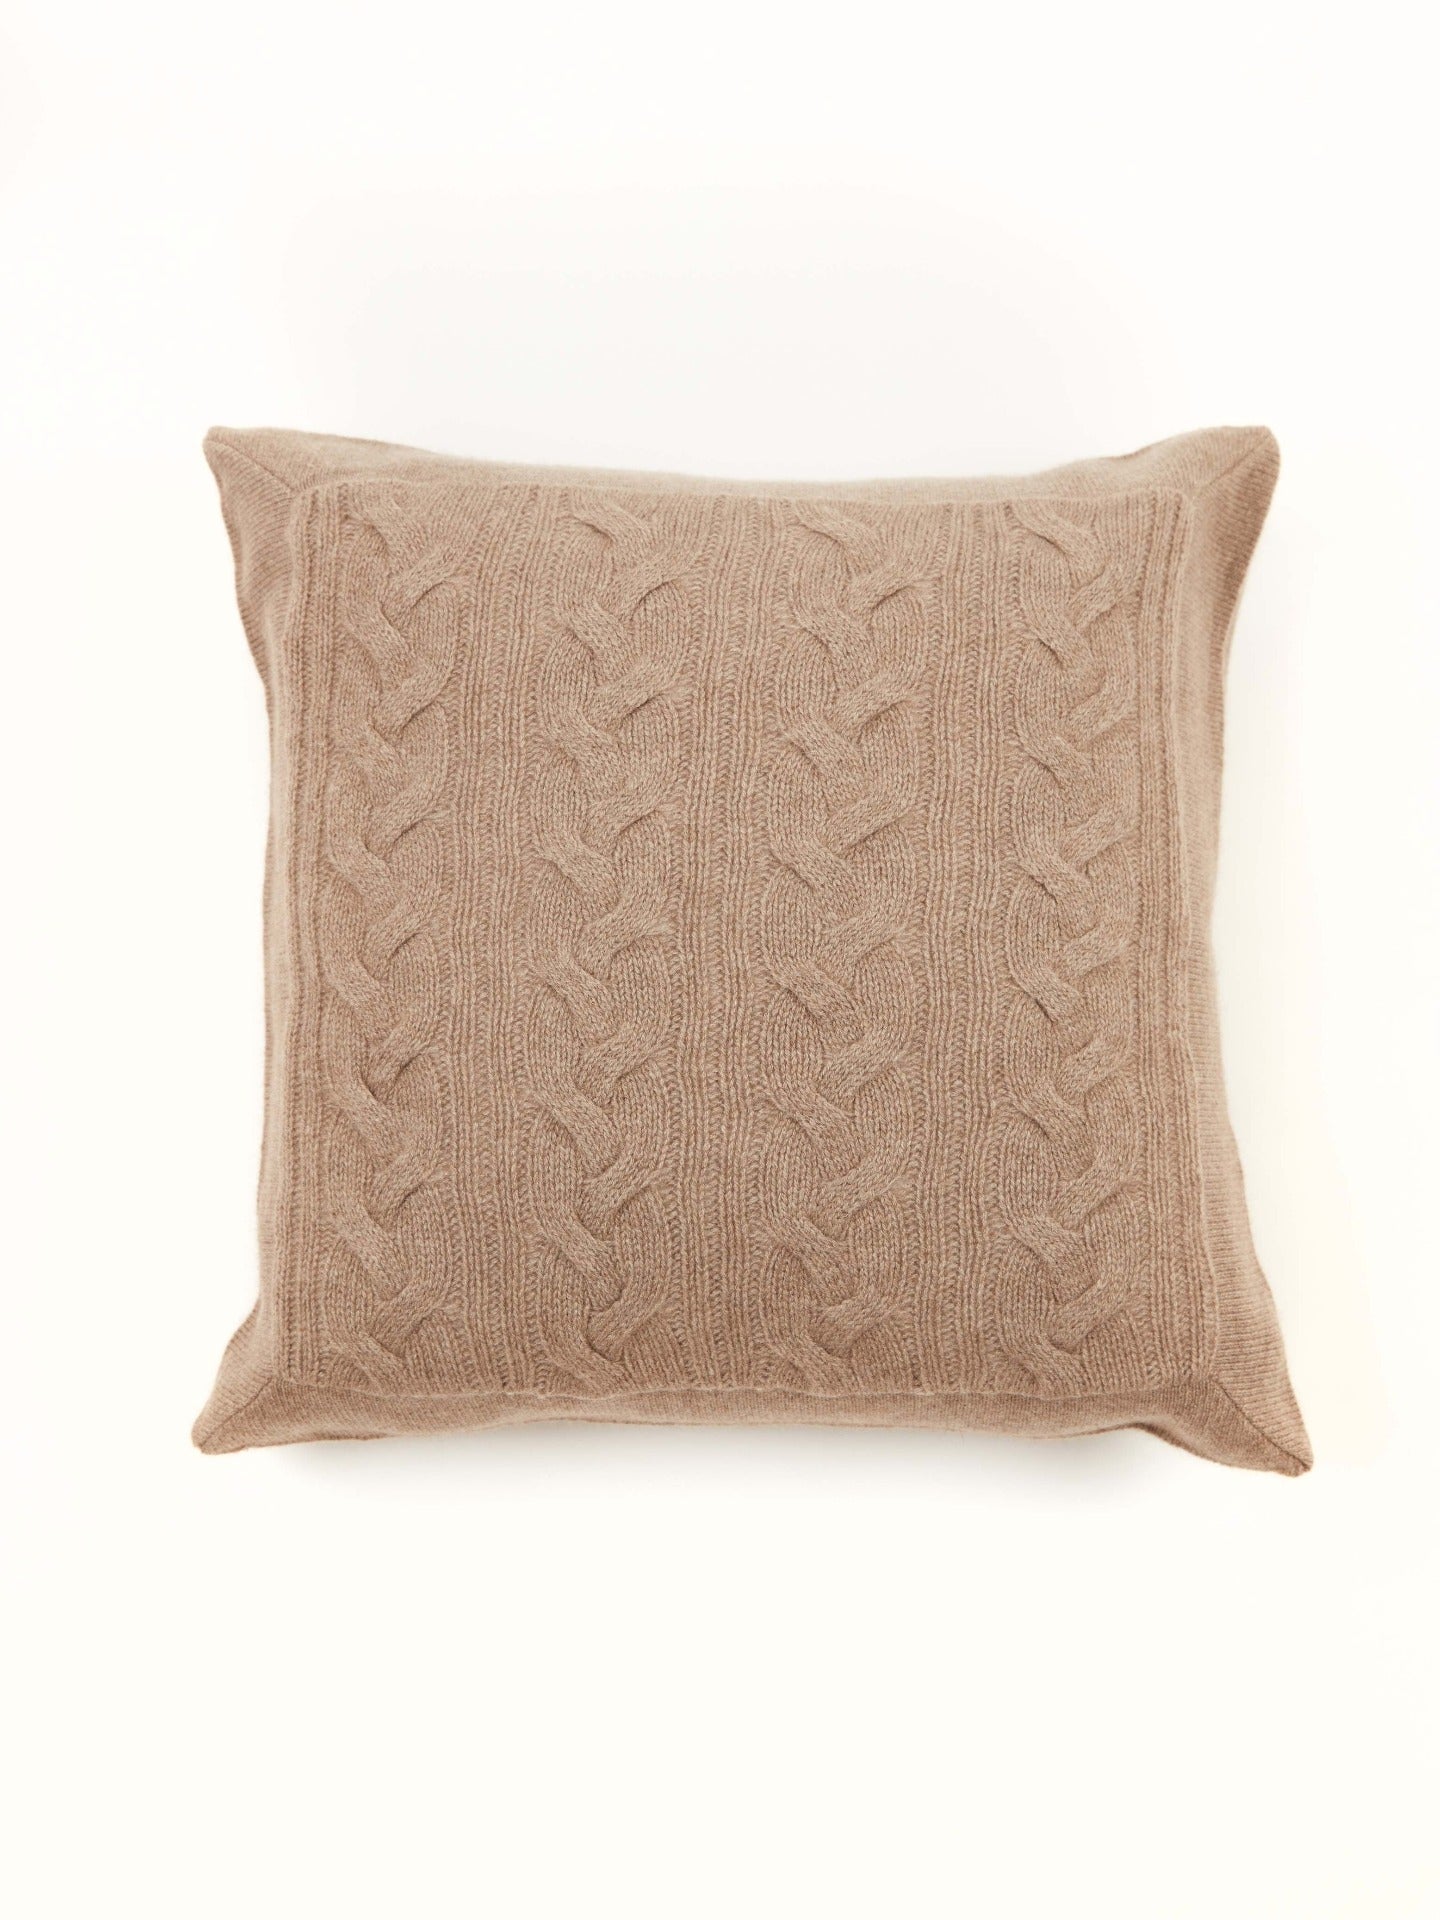 Cashmere Knitted Pillow Cover Taupe - Gobi Cashmere